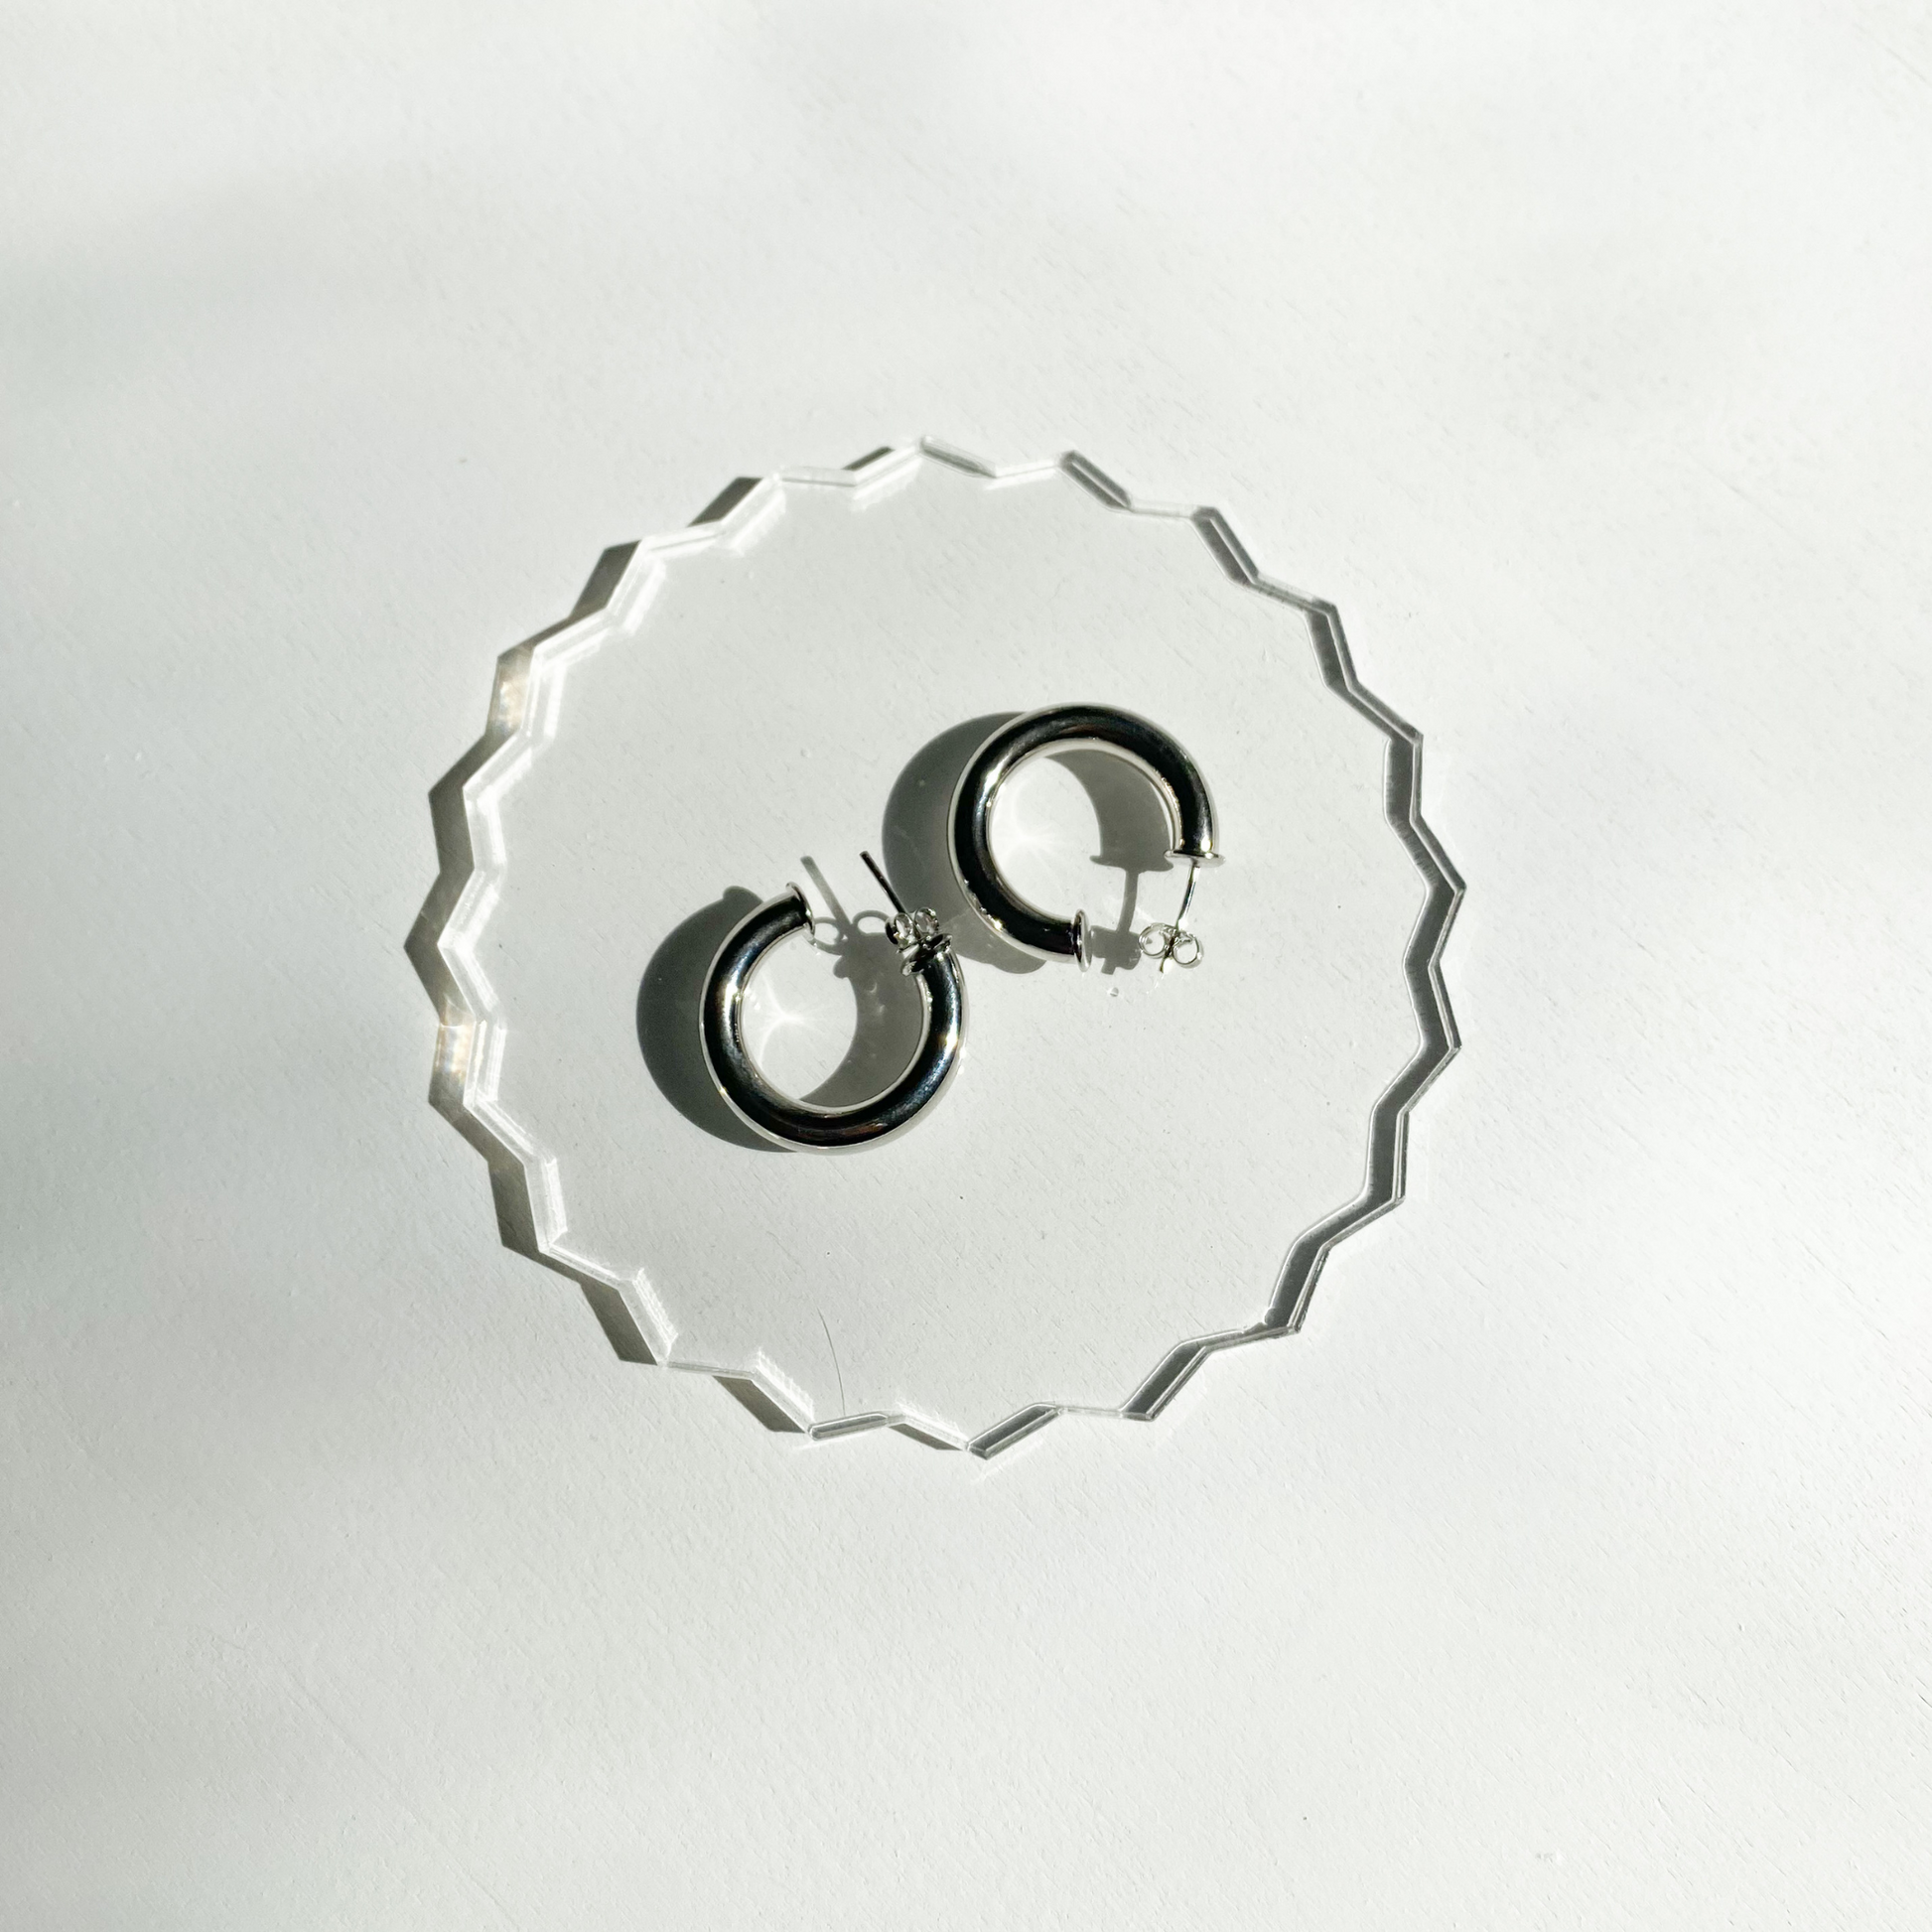 Roop jewelry chunky silver hoops. Silver jewelry in Oakland, Ca. Jewelry boutique in Oakland. Jewelry shop in Oakland.